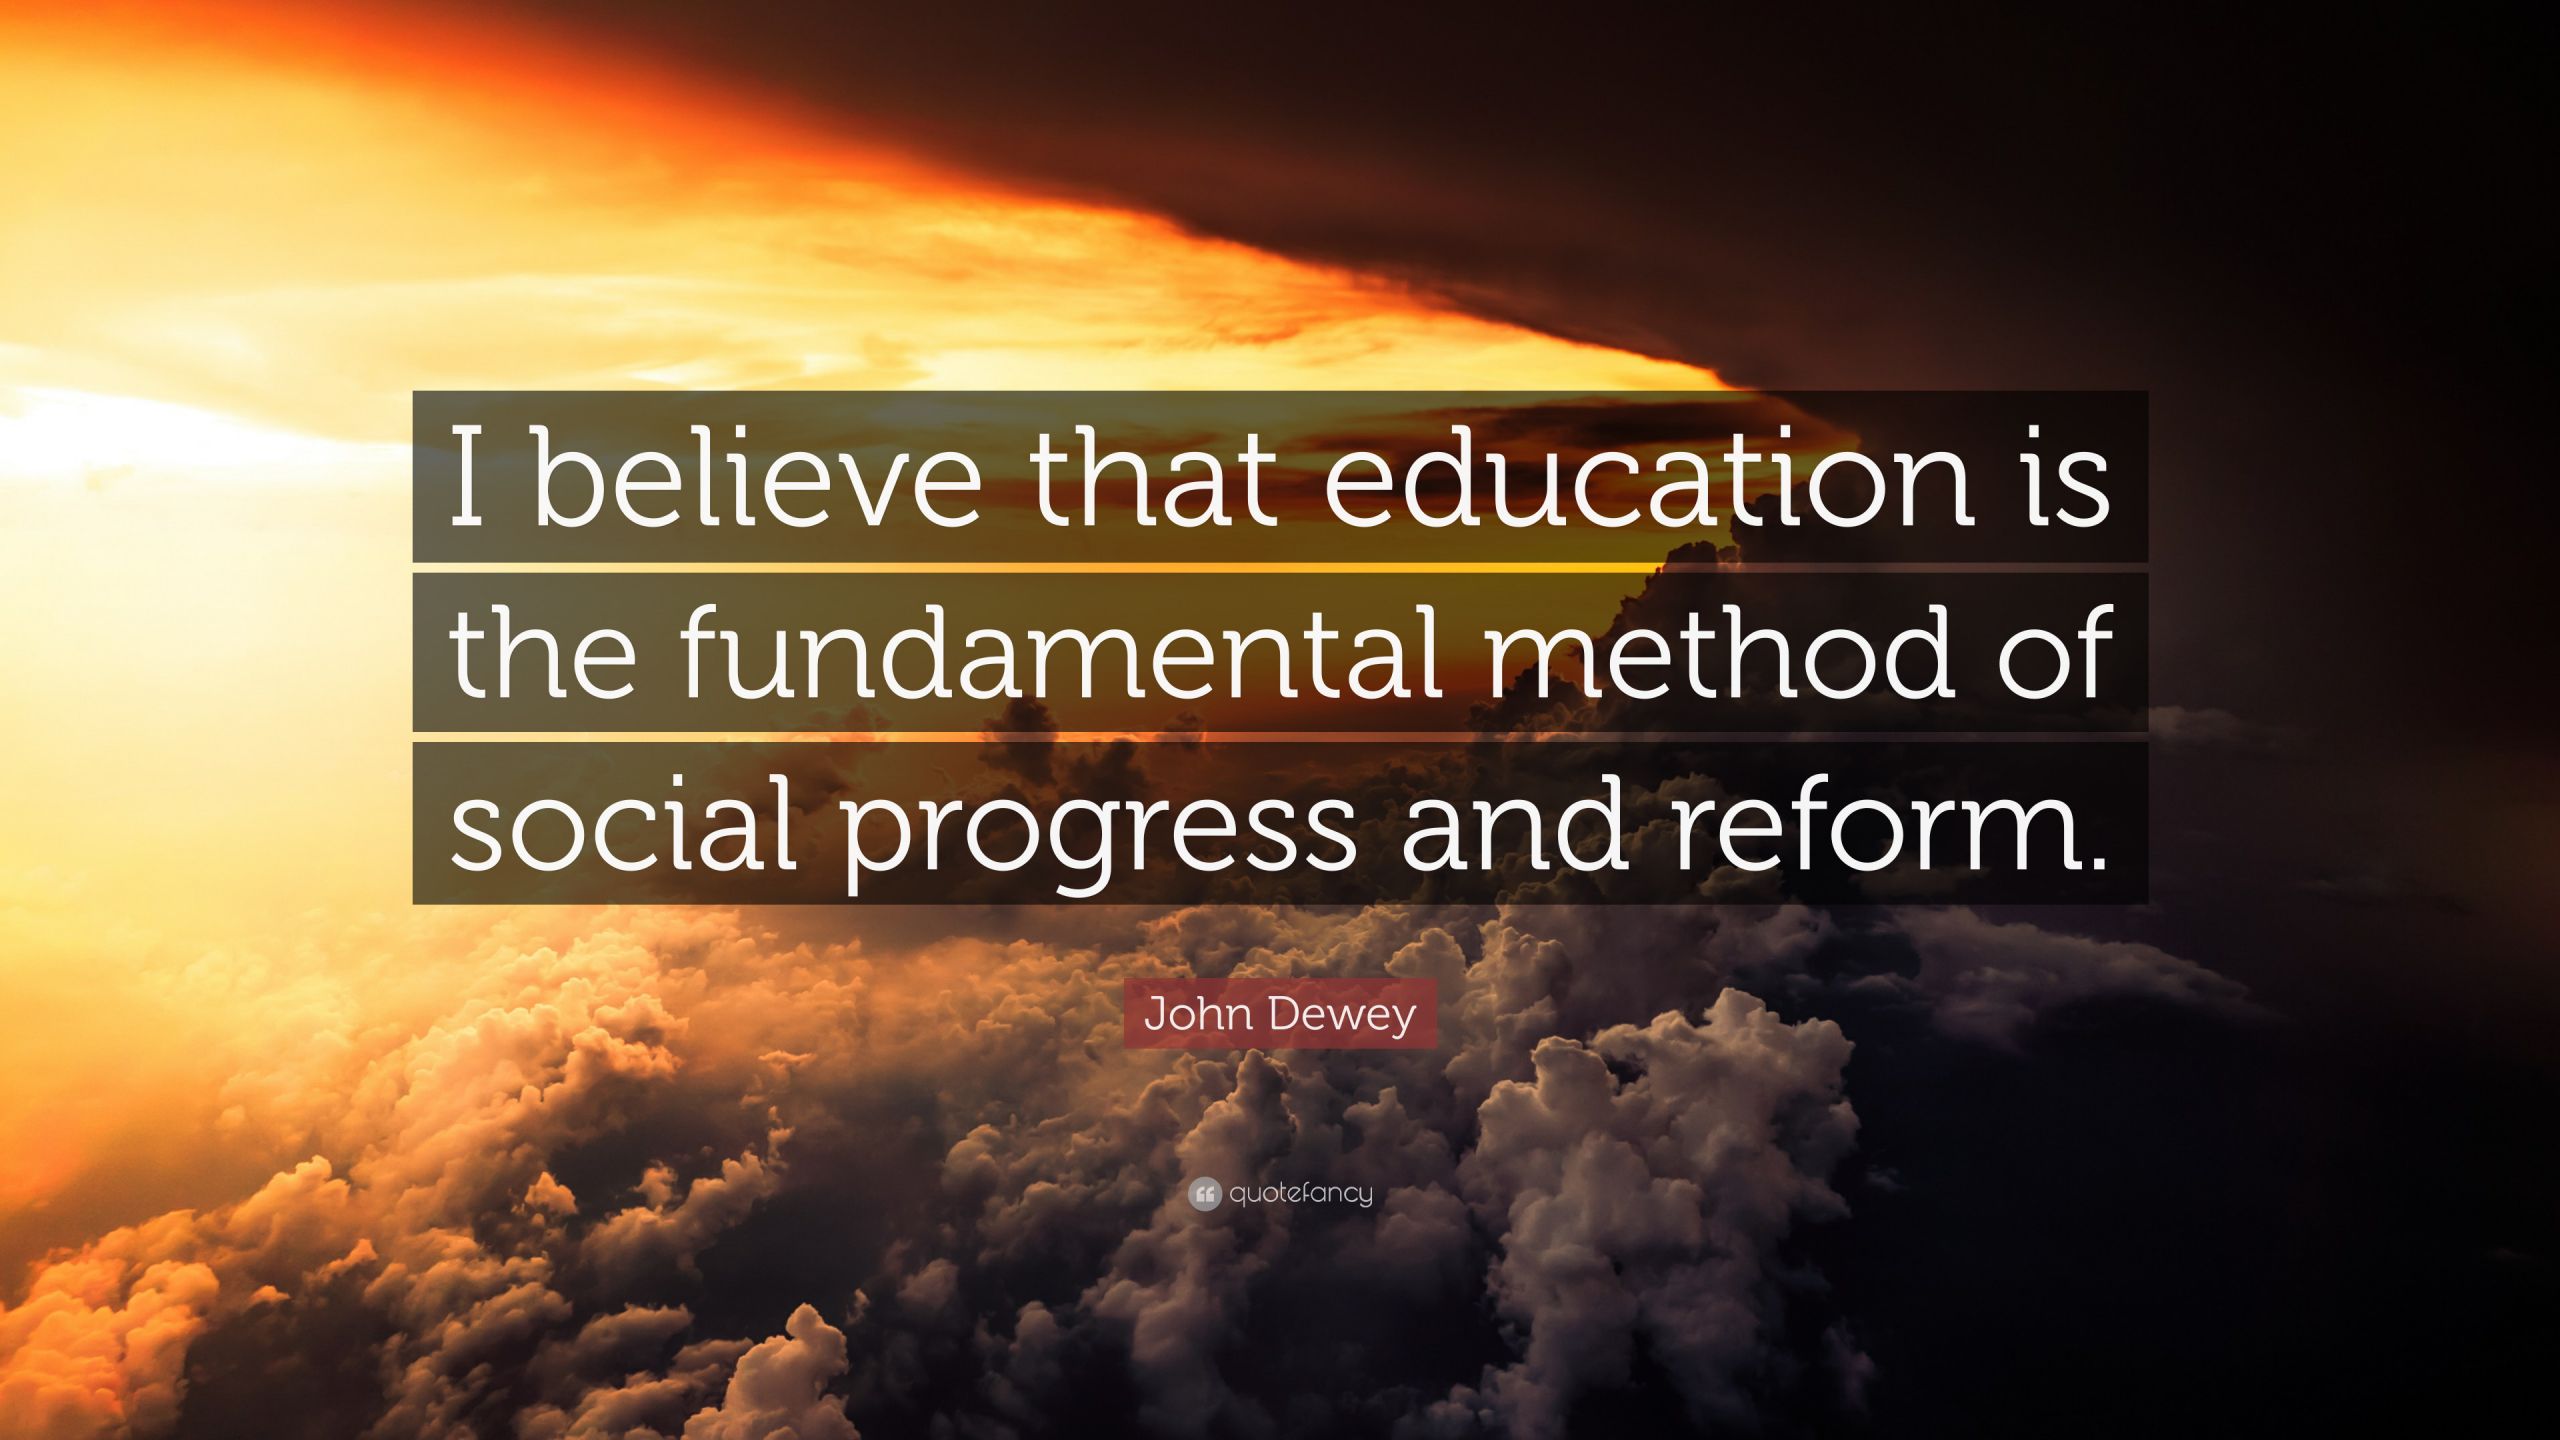 John Dewey Quotes On Education
 John Dewey Quote “I believe that education is the